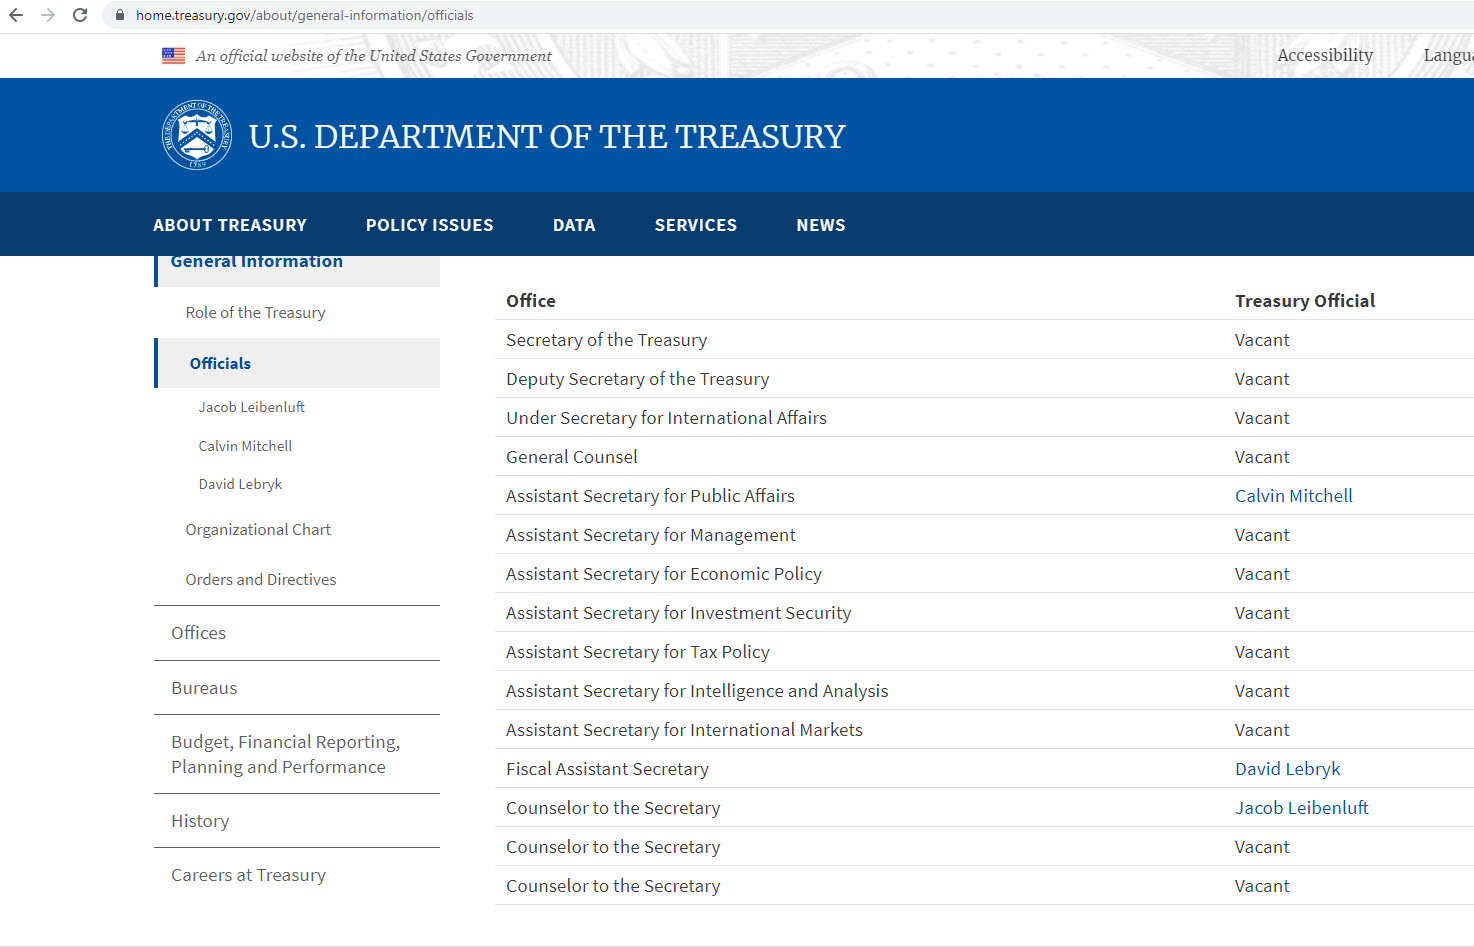 US Dept of Treasury nearly all vacant today Jan 26